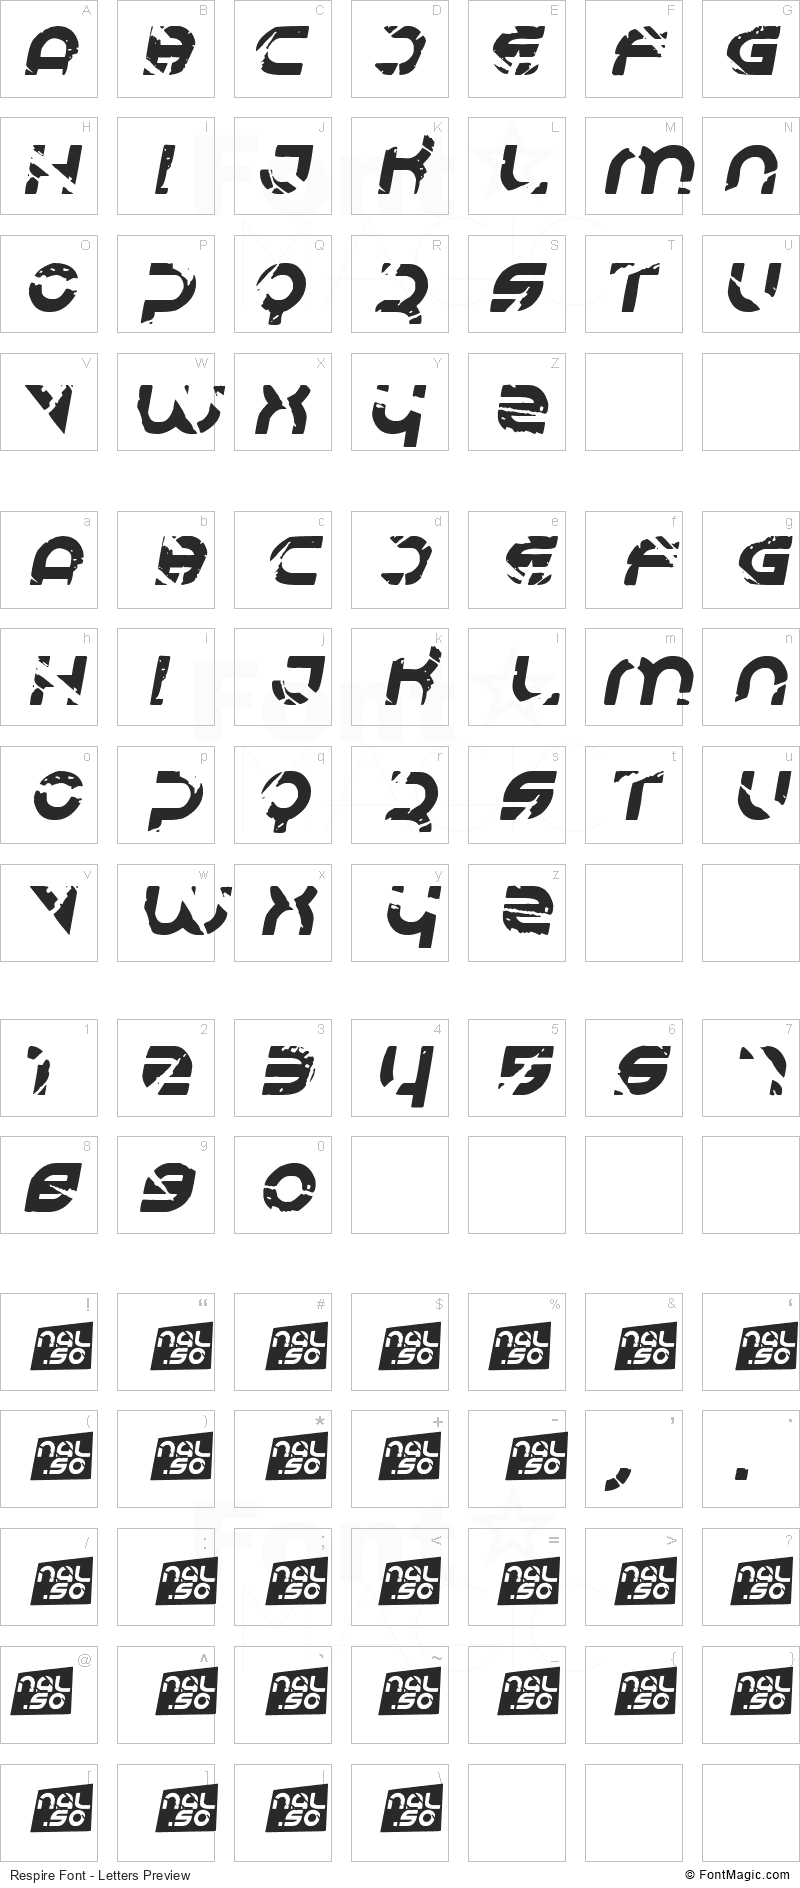 Respire Font - All Latters Preview Chart